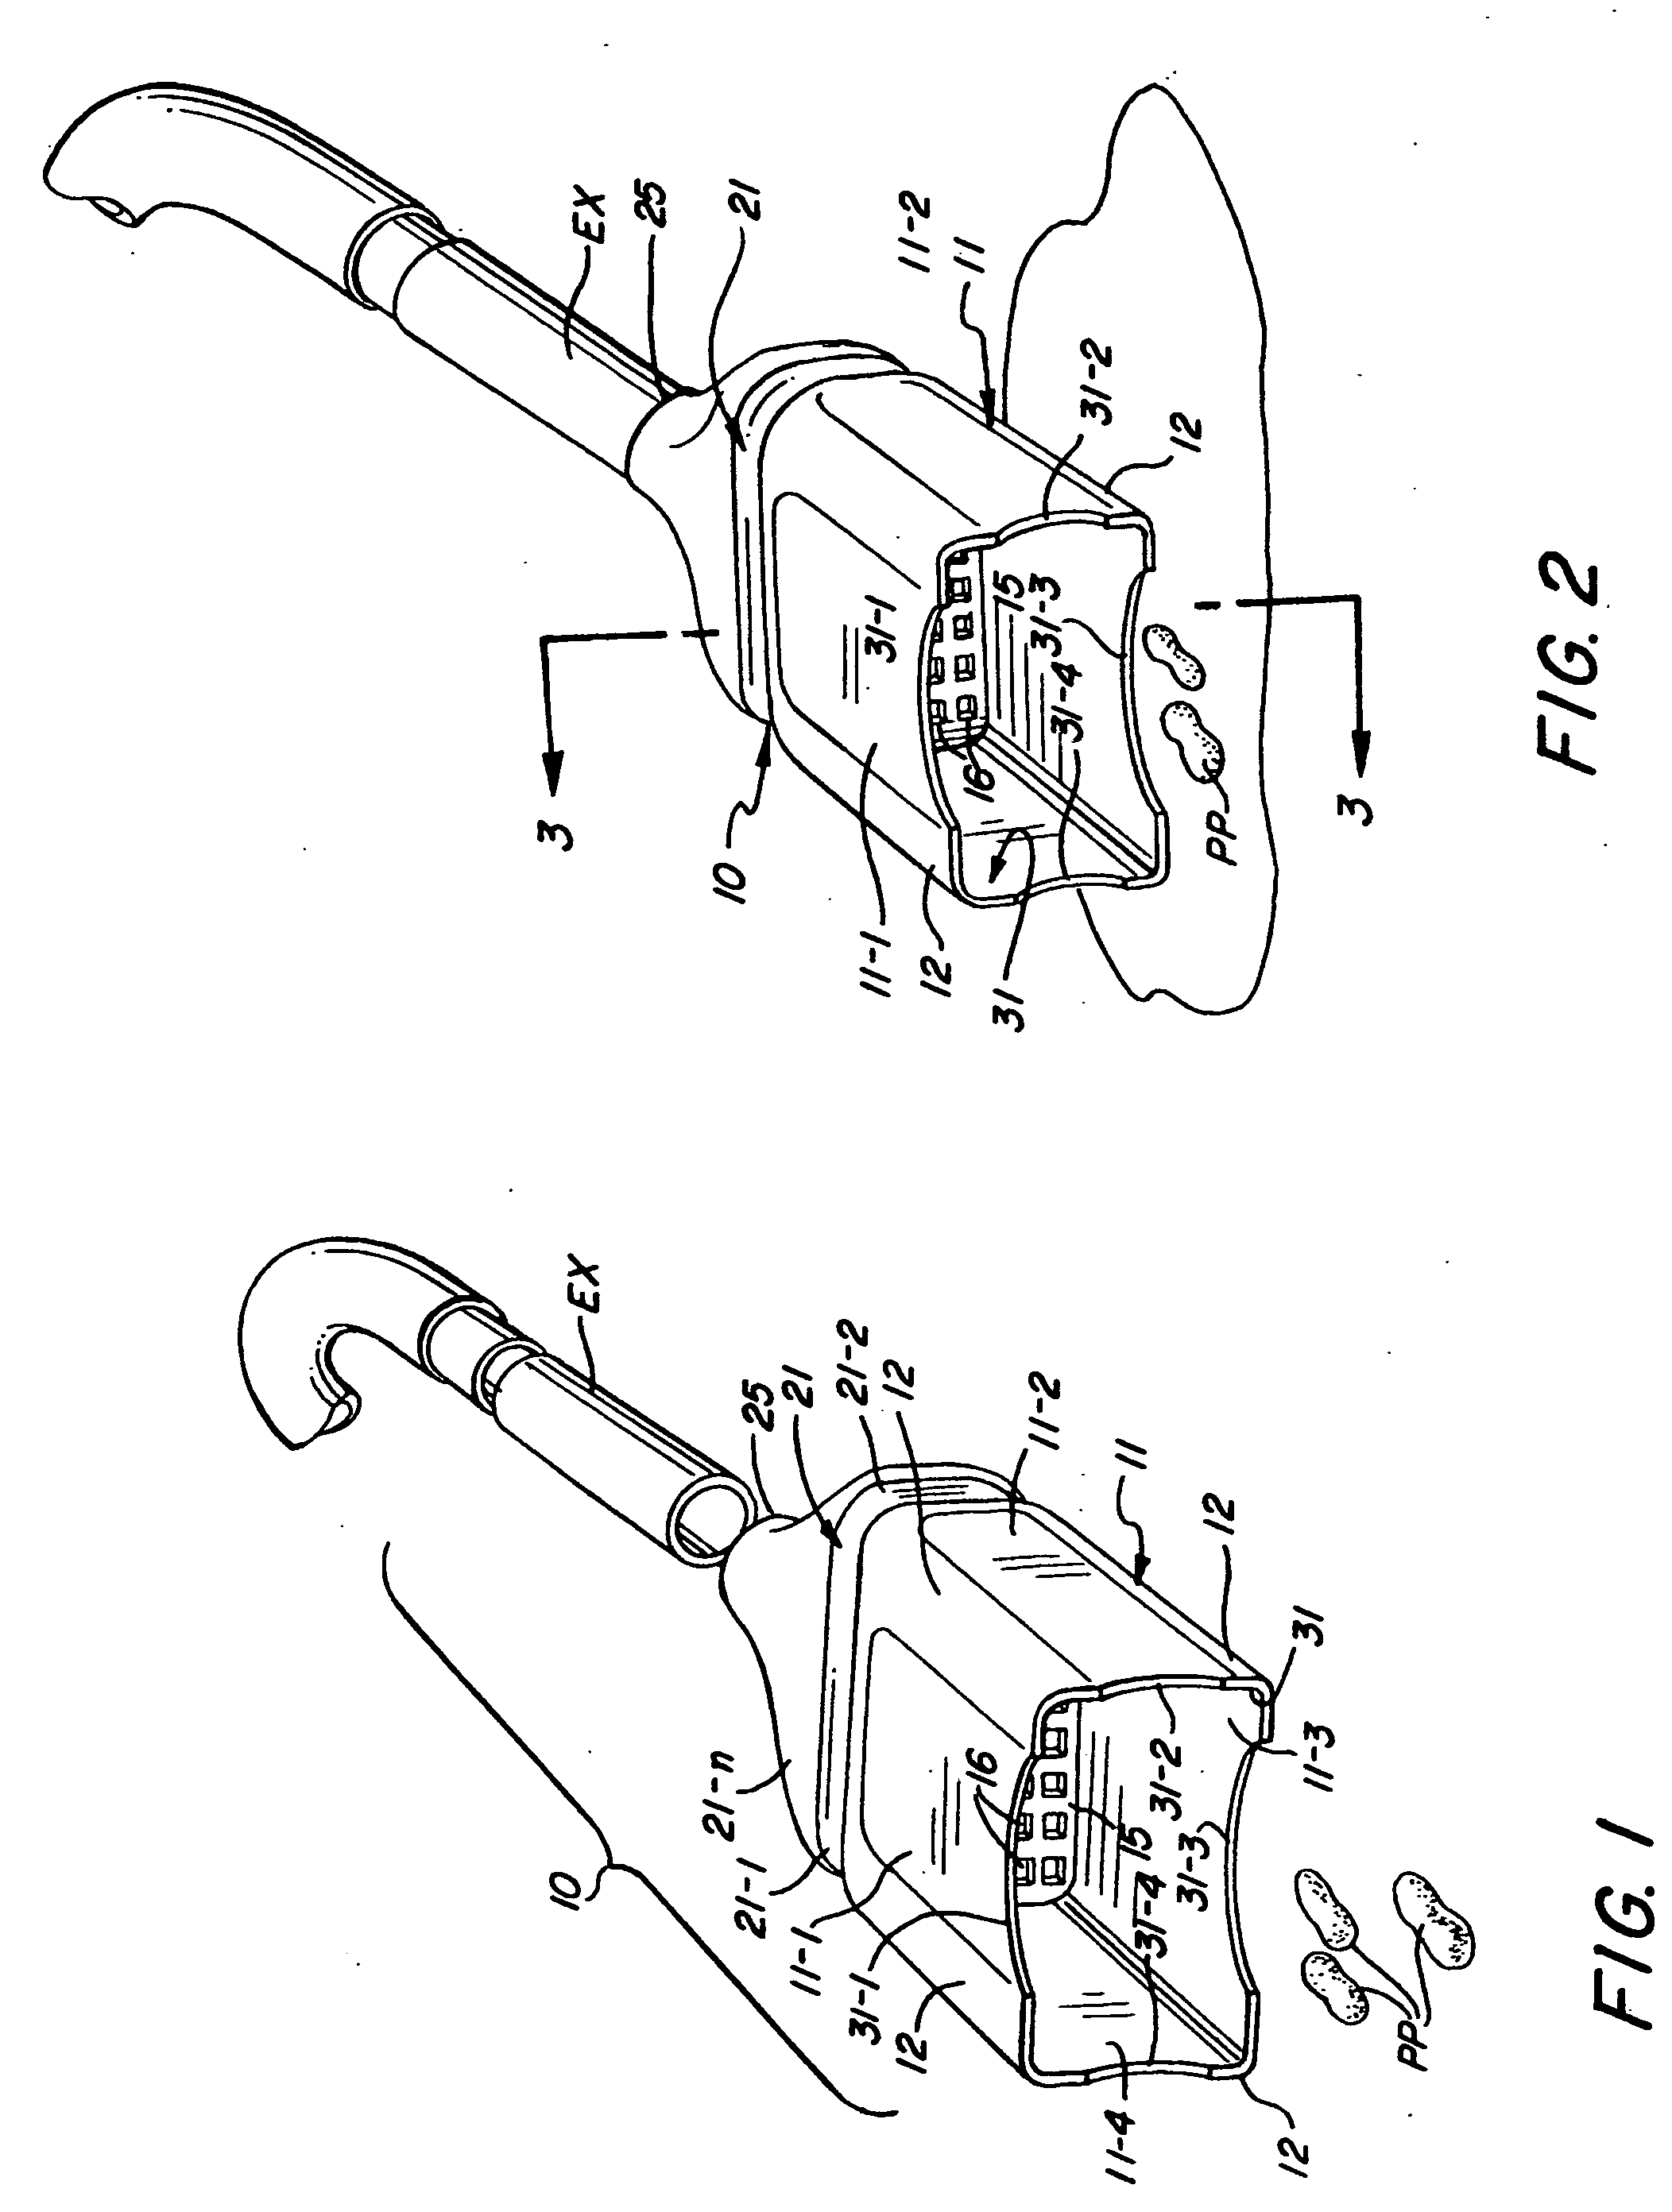 Apparatus for collecting lightweight packing particulates